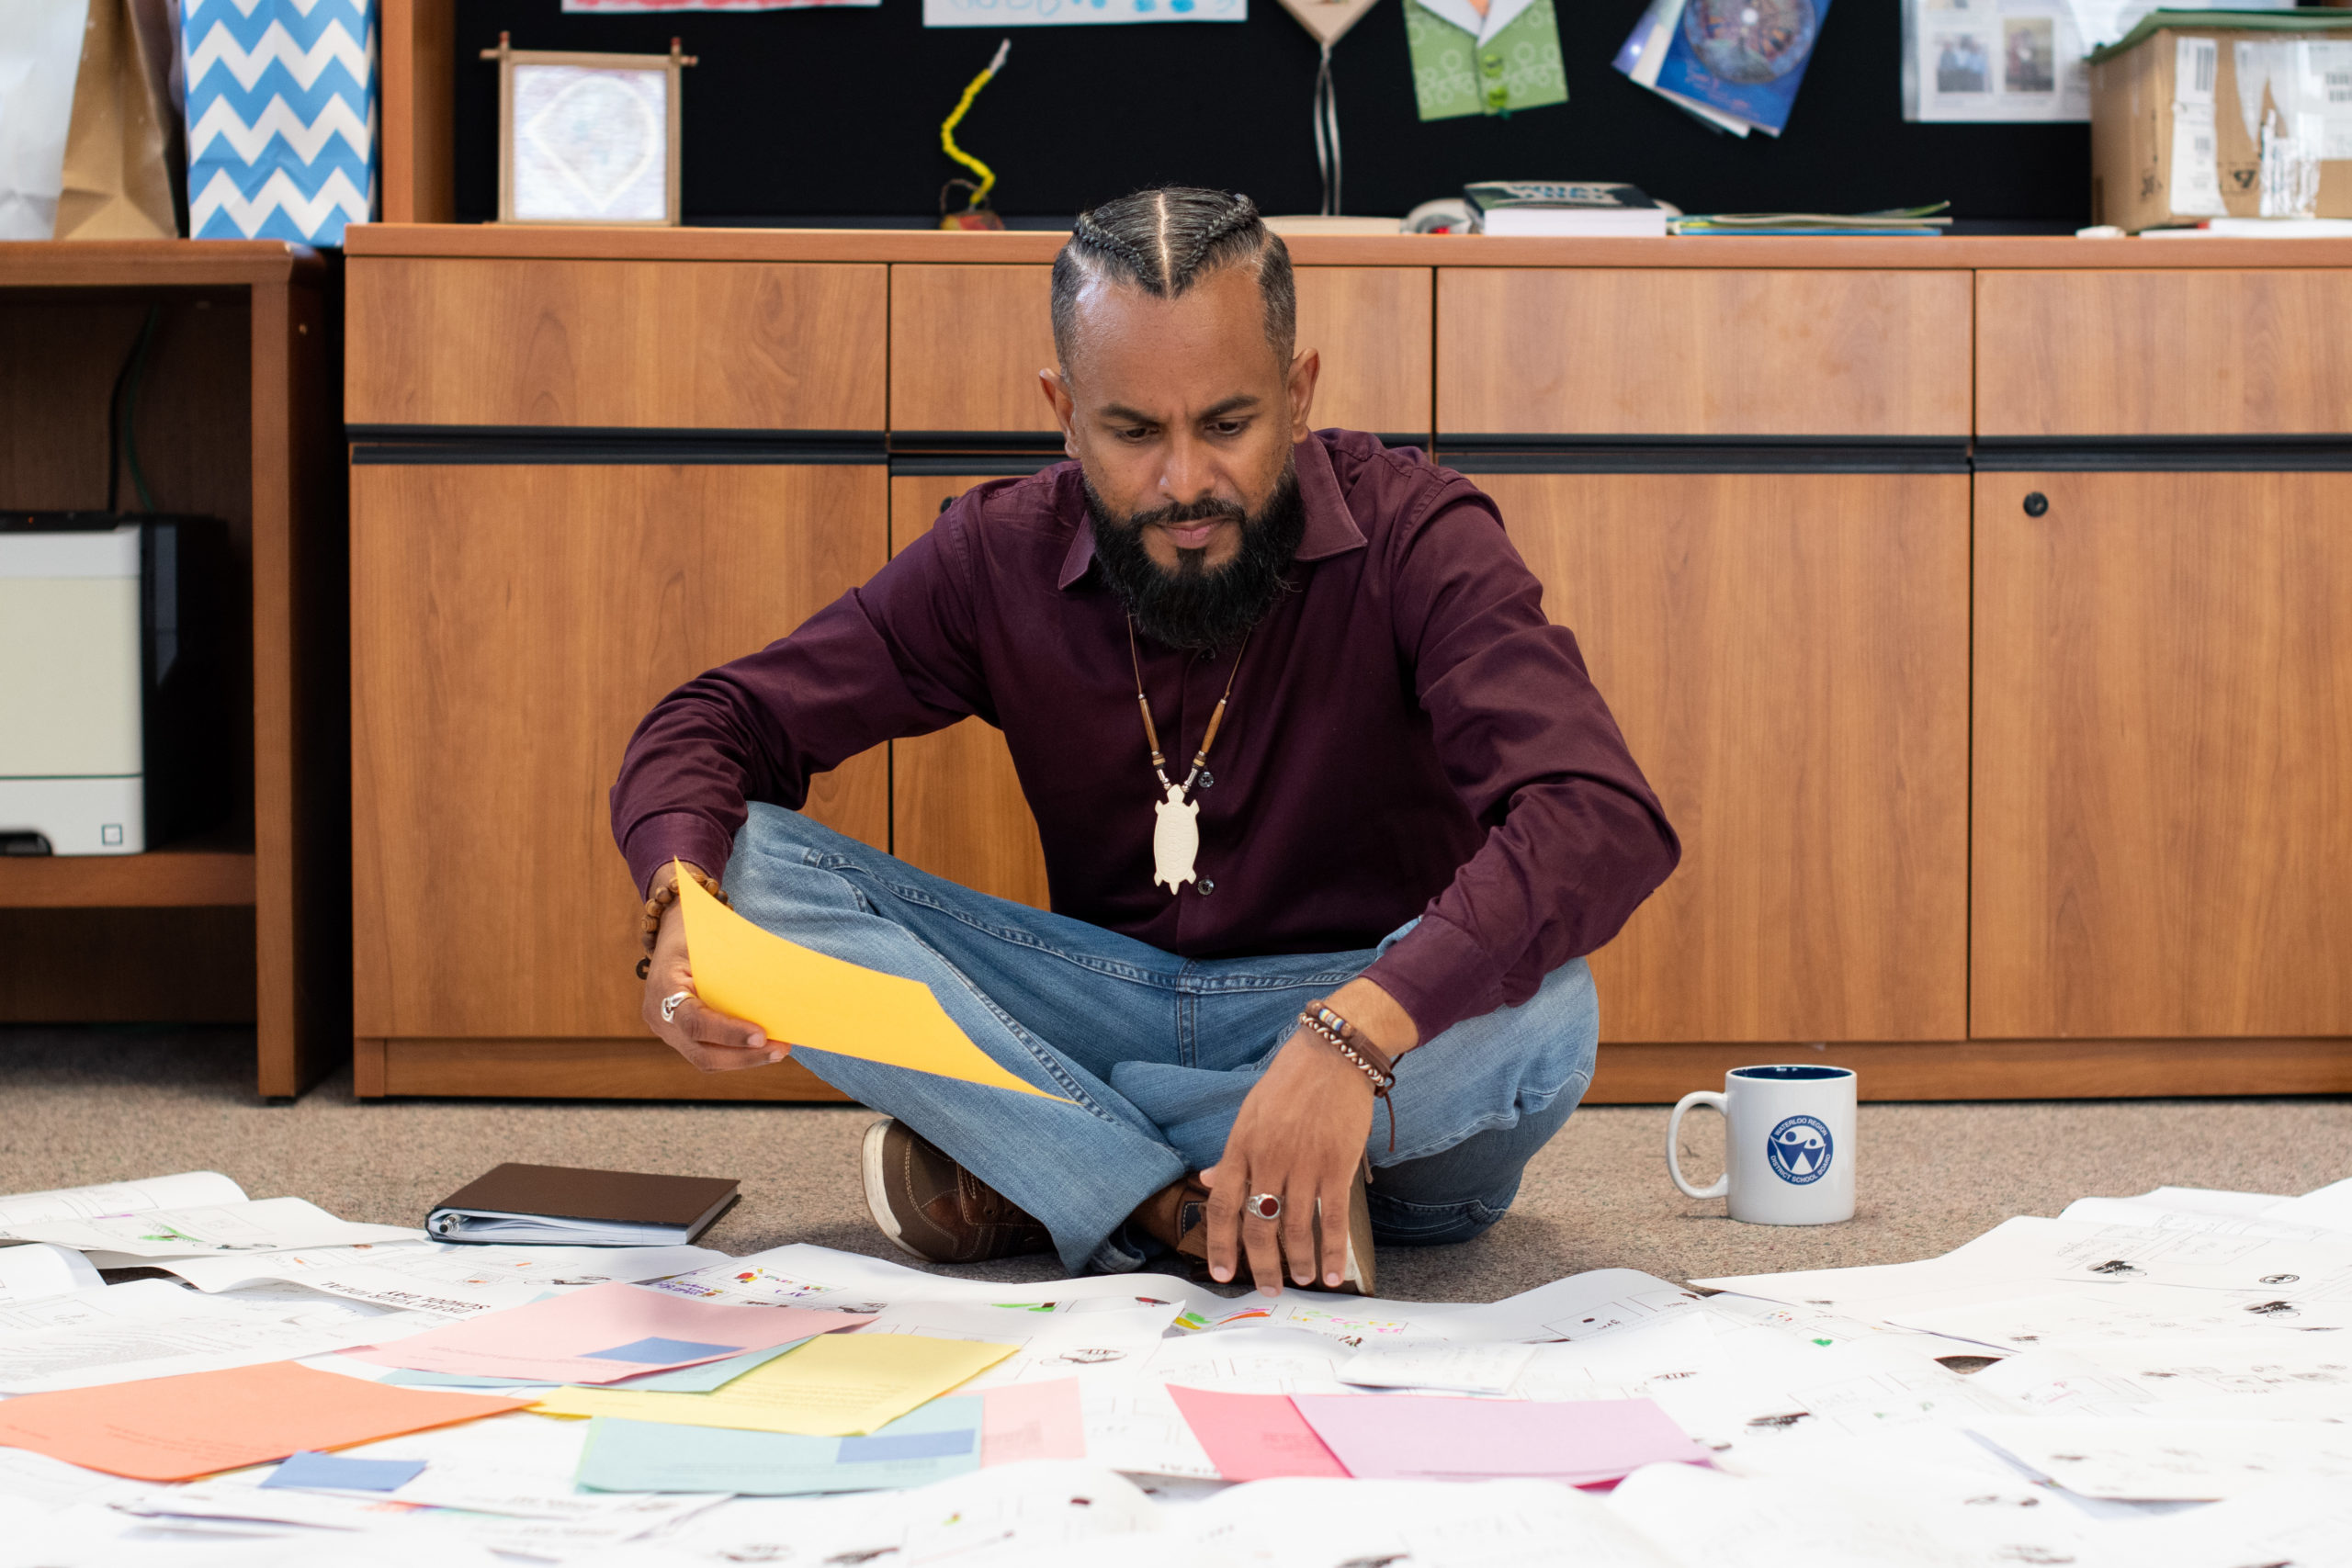 jeewan chanicka, director of education, sits on the floor of his office, surrounded by paper copies of student feedback. He is reading one in his hand.